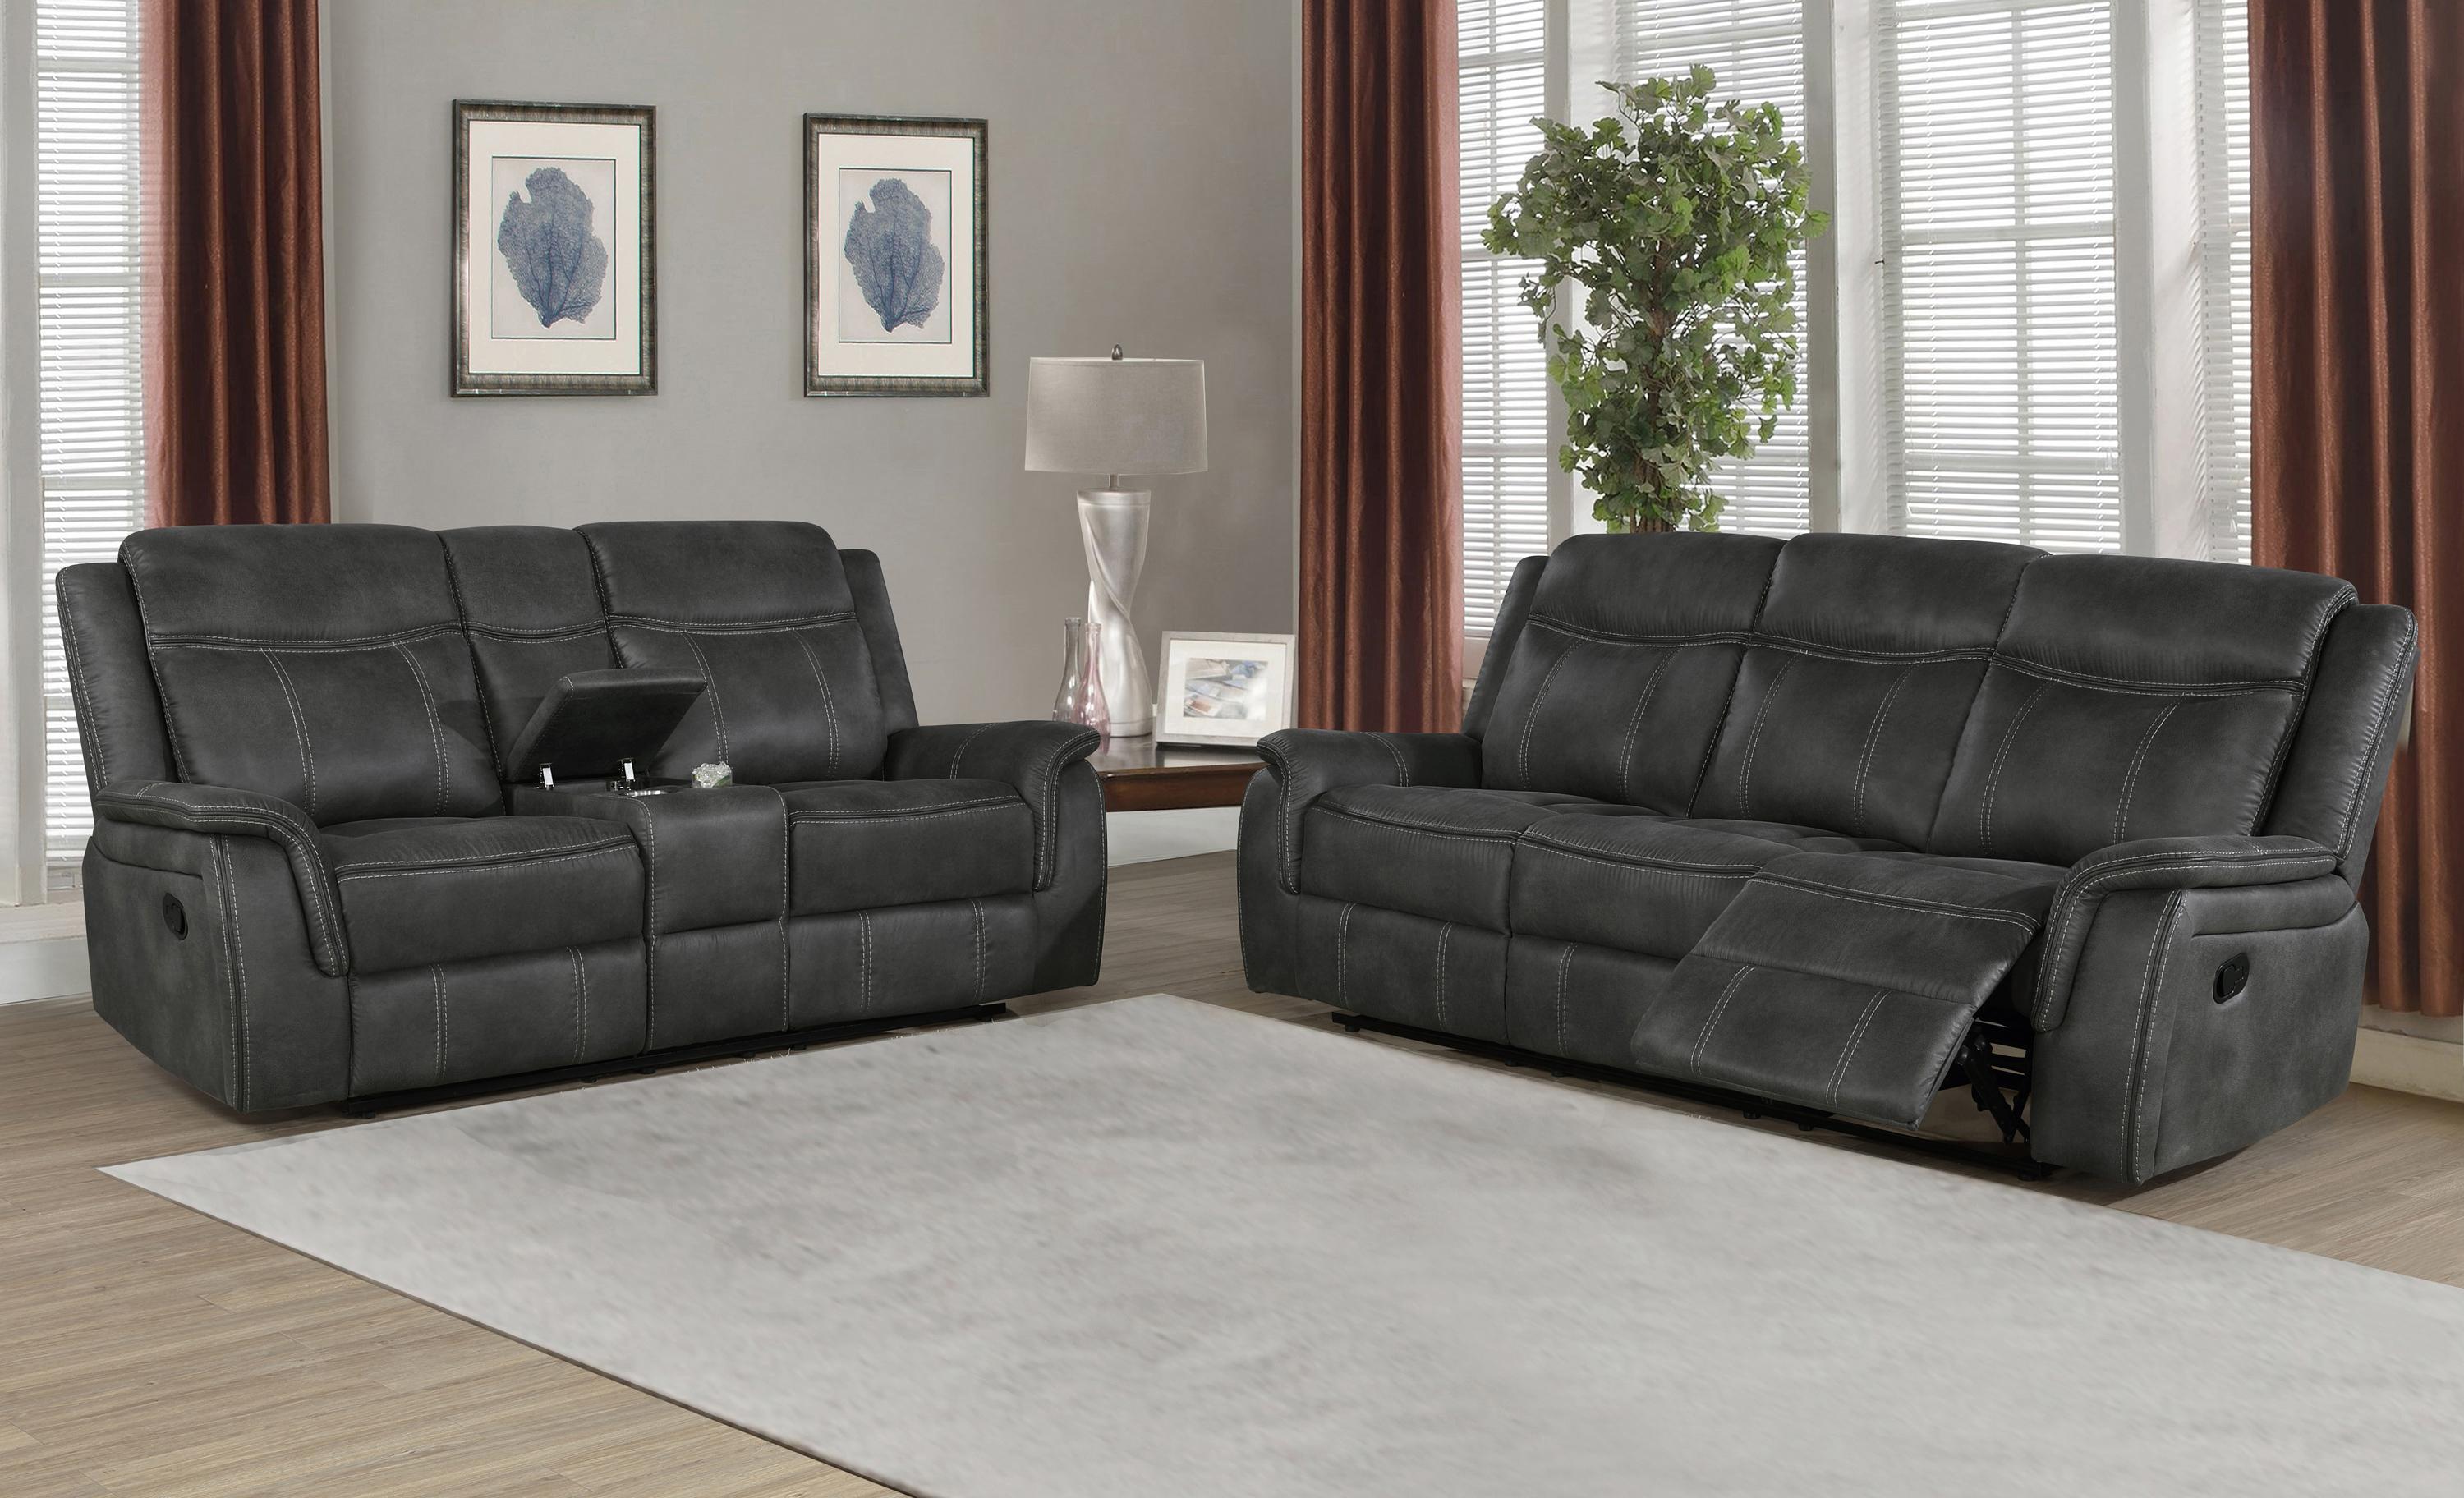 Transitional Living Room Set 603504-S2 Lawrence 603504-S2 in Charcoal 